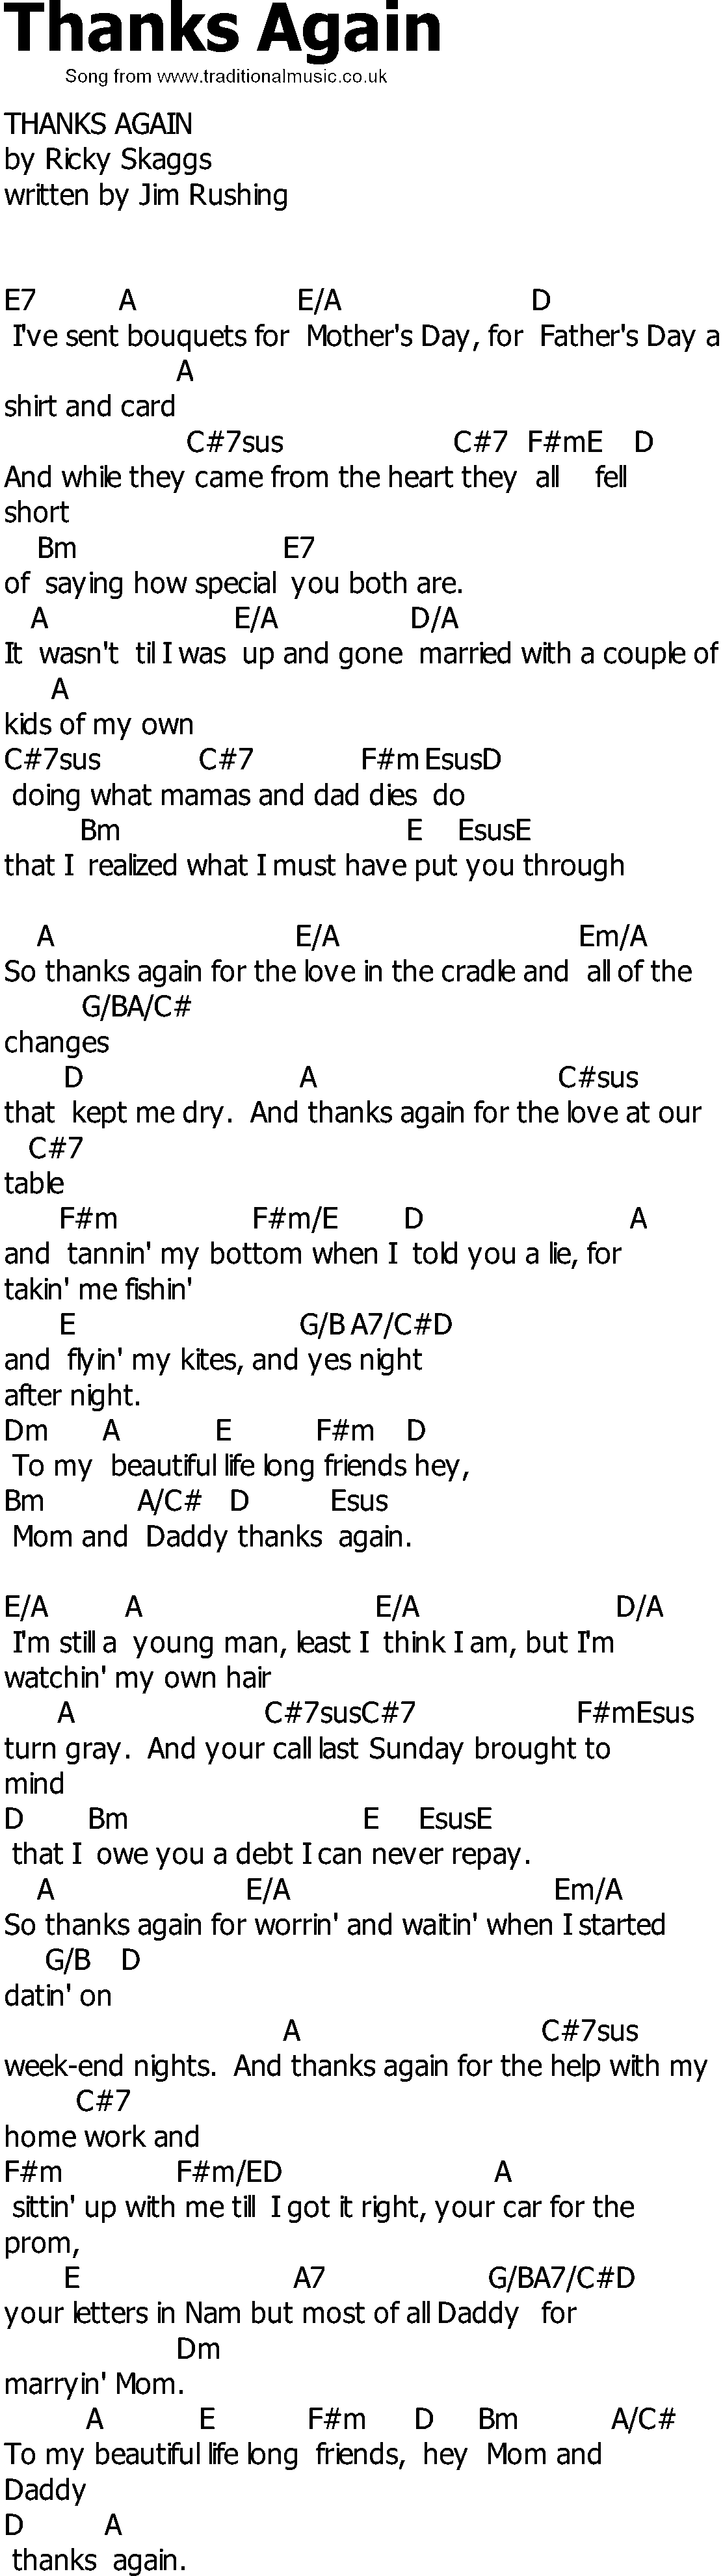 Old Country song lyrics with chords - Thanks Again